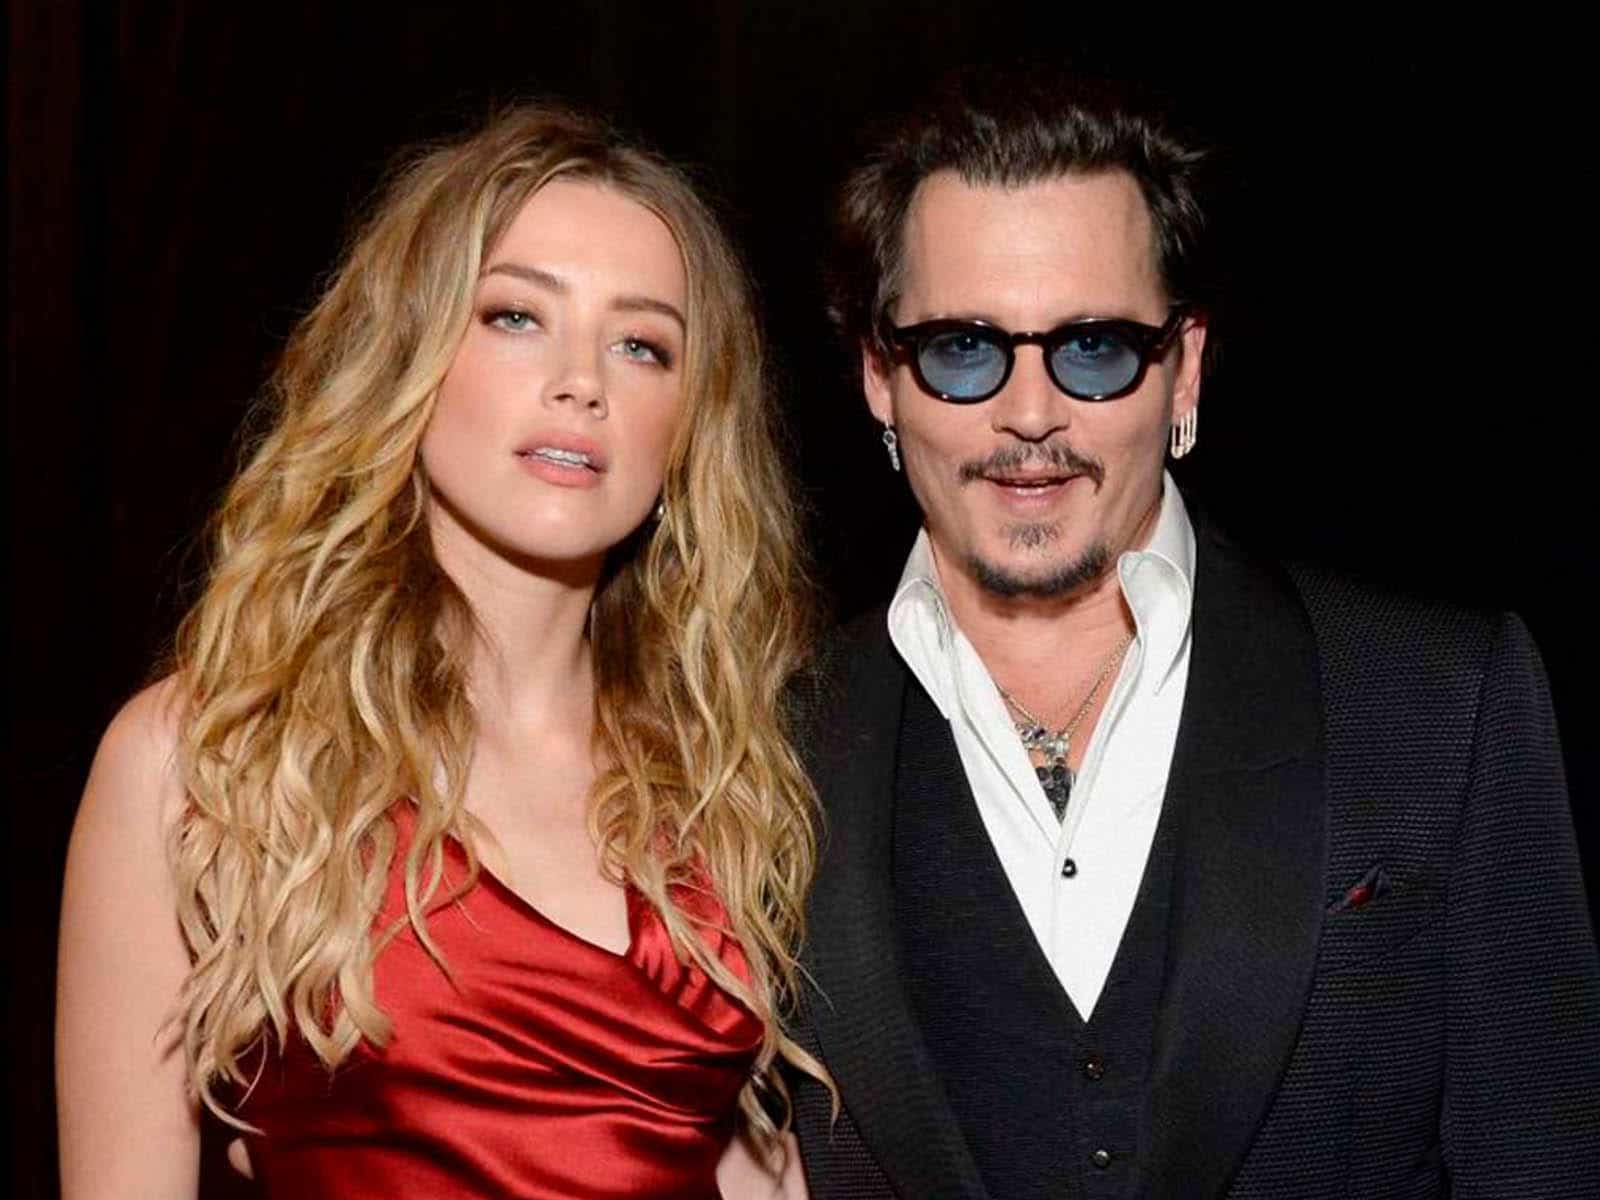 Find out all about what happened between Johnny Depp and Amber Heard